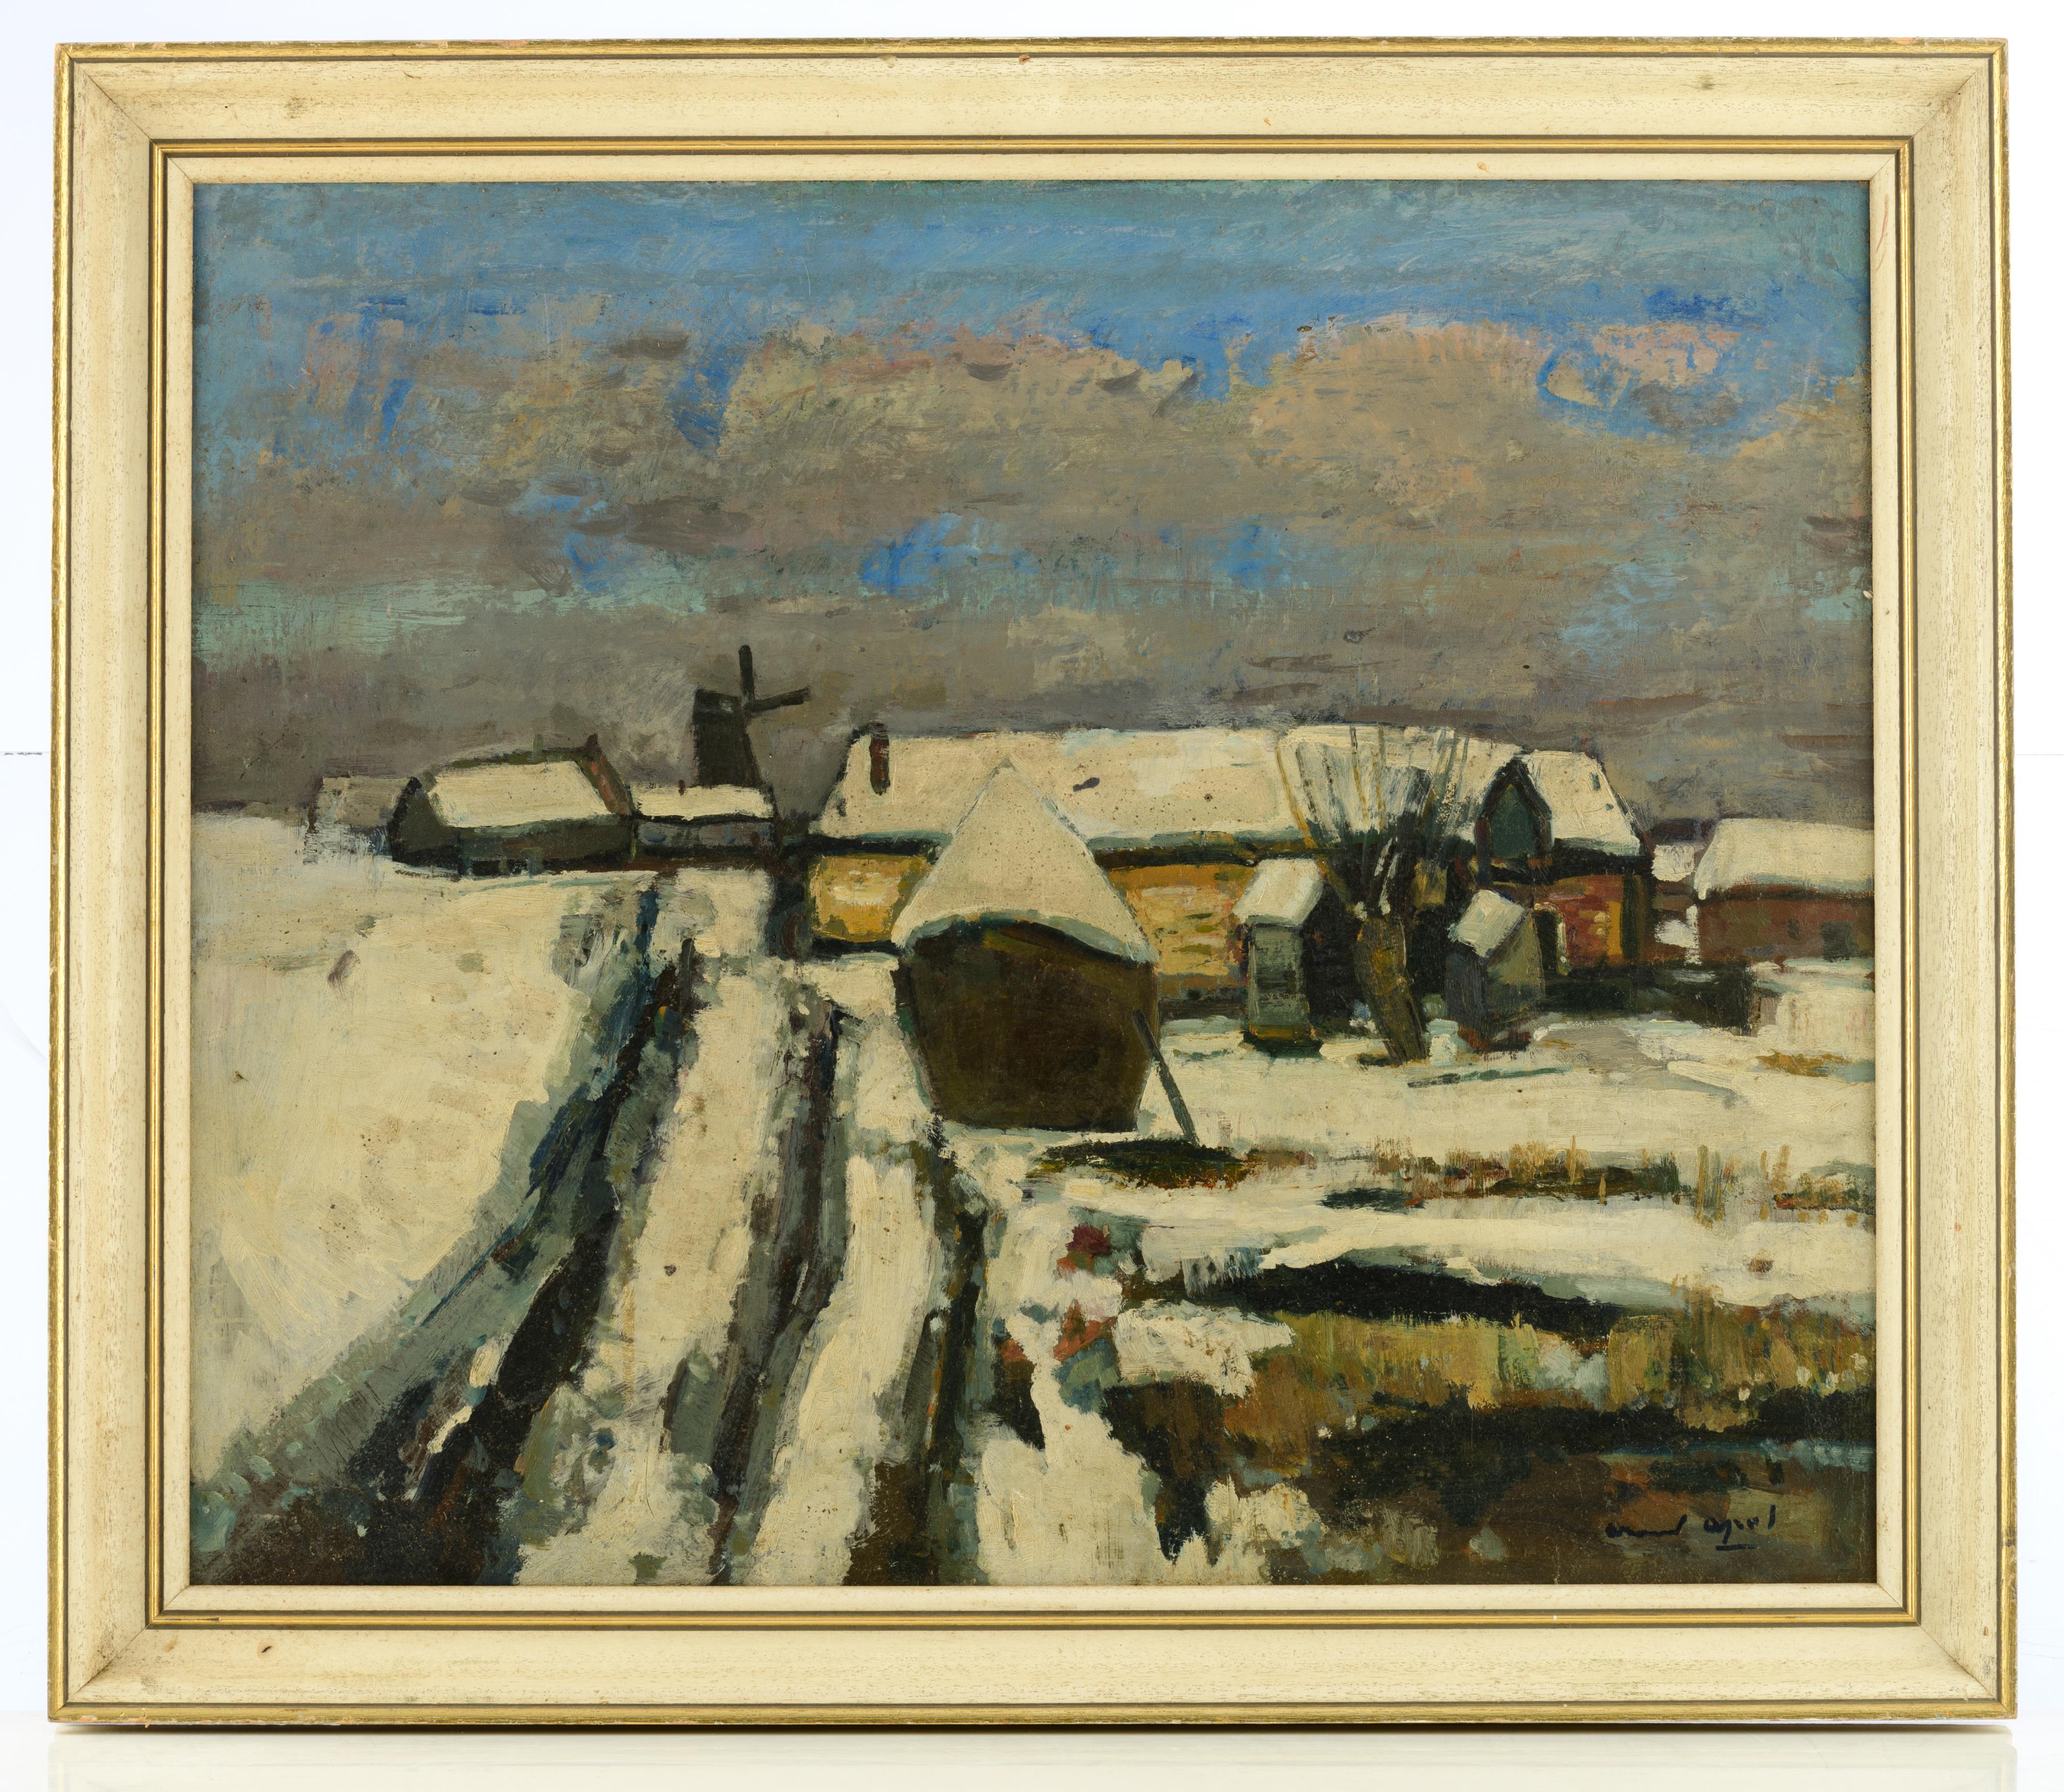 Apol A., a rural view in winter, oil on canvas, 50 x 60 cm. Added: Frank L., a cloudy view on Bruges - Image 2 of 7